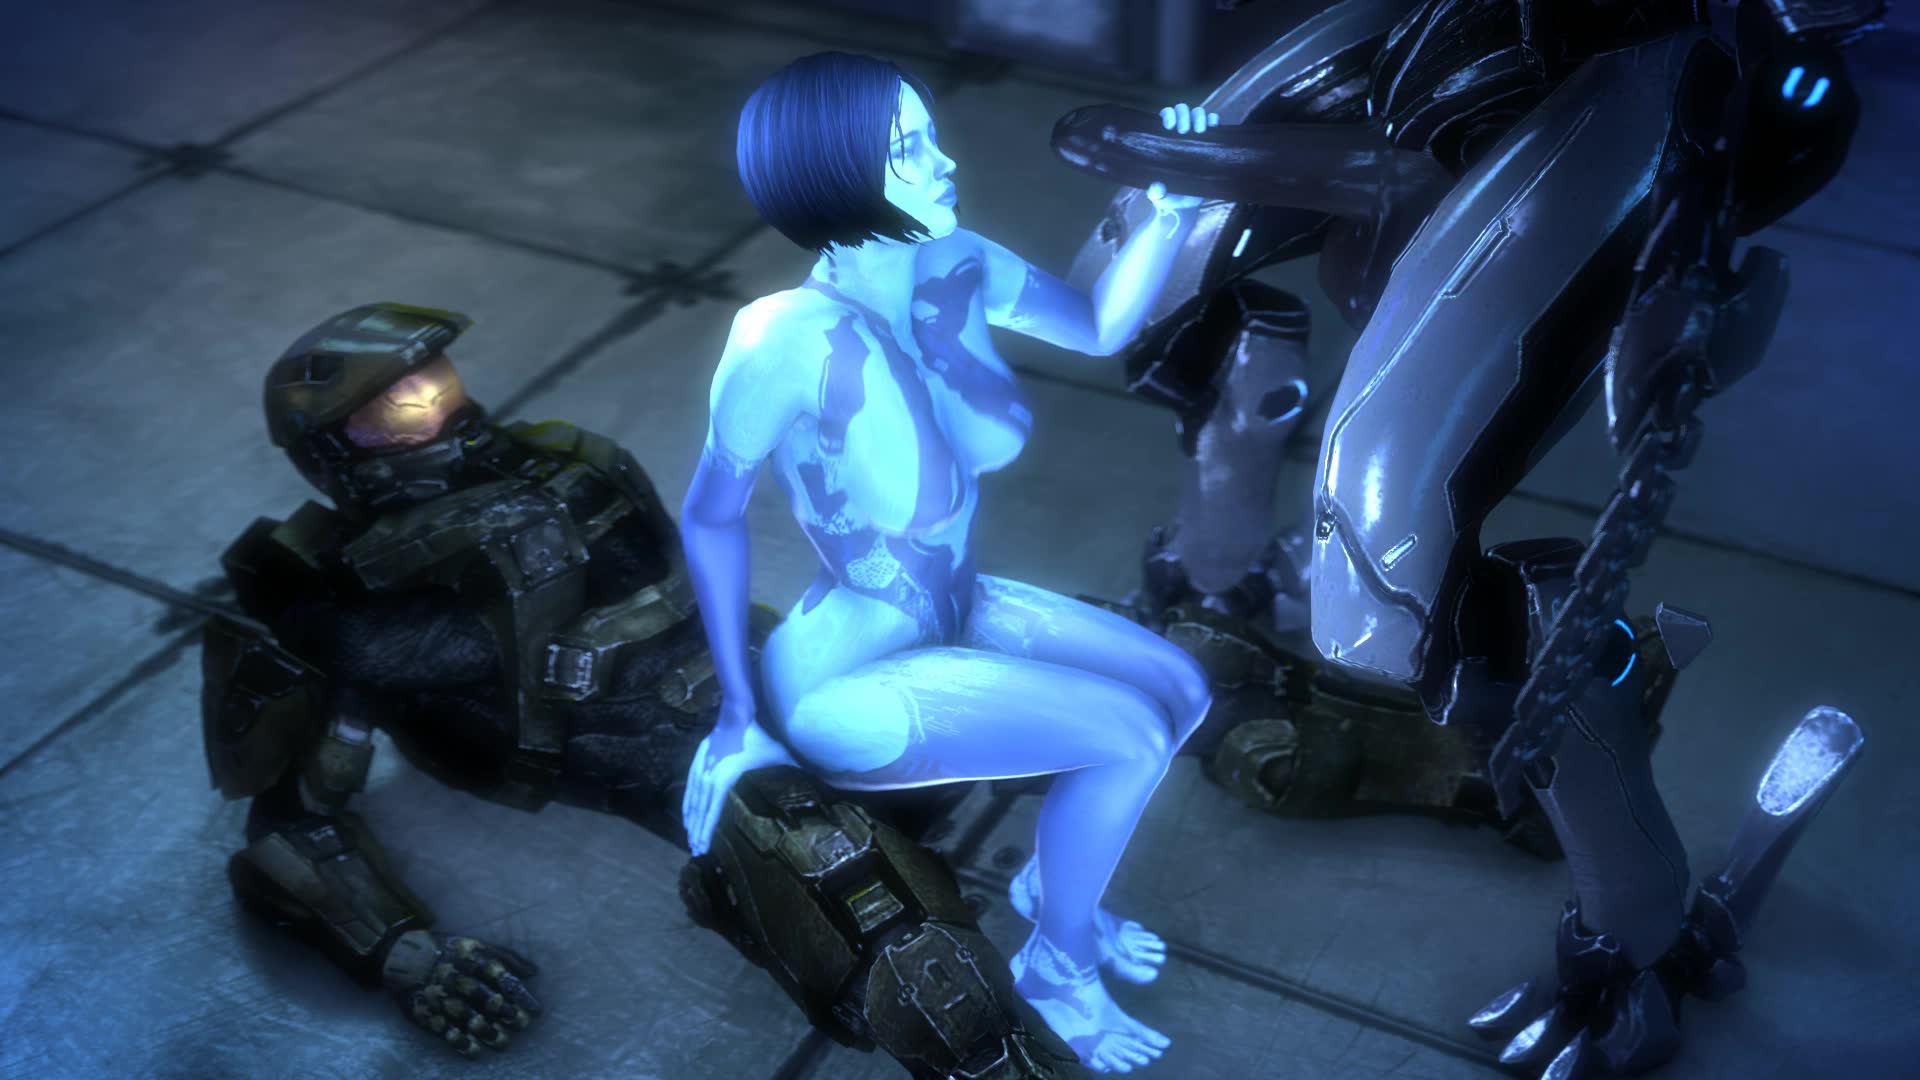 Cortana Gets Big Dick In Reverse Cowgirl Position And Gives Handjob Together – Halo NSFW animation thumbnail